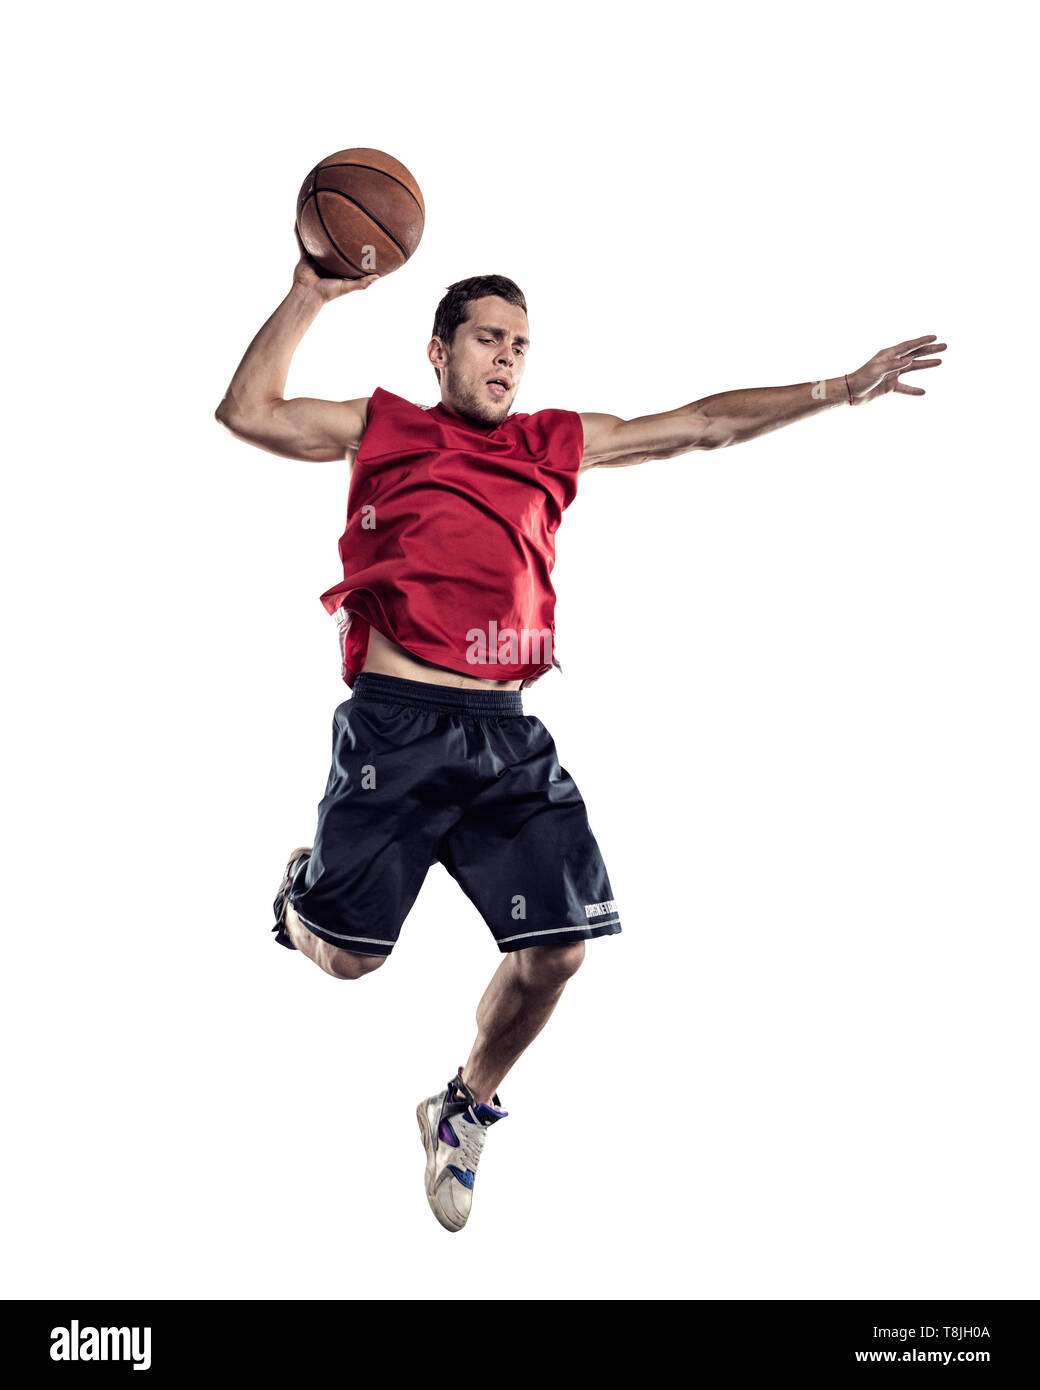 Basketball player in action isolated on white background Stock Photo